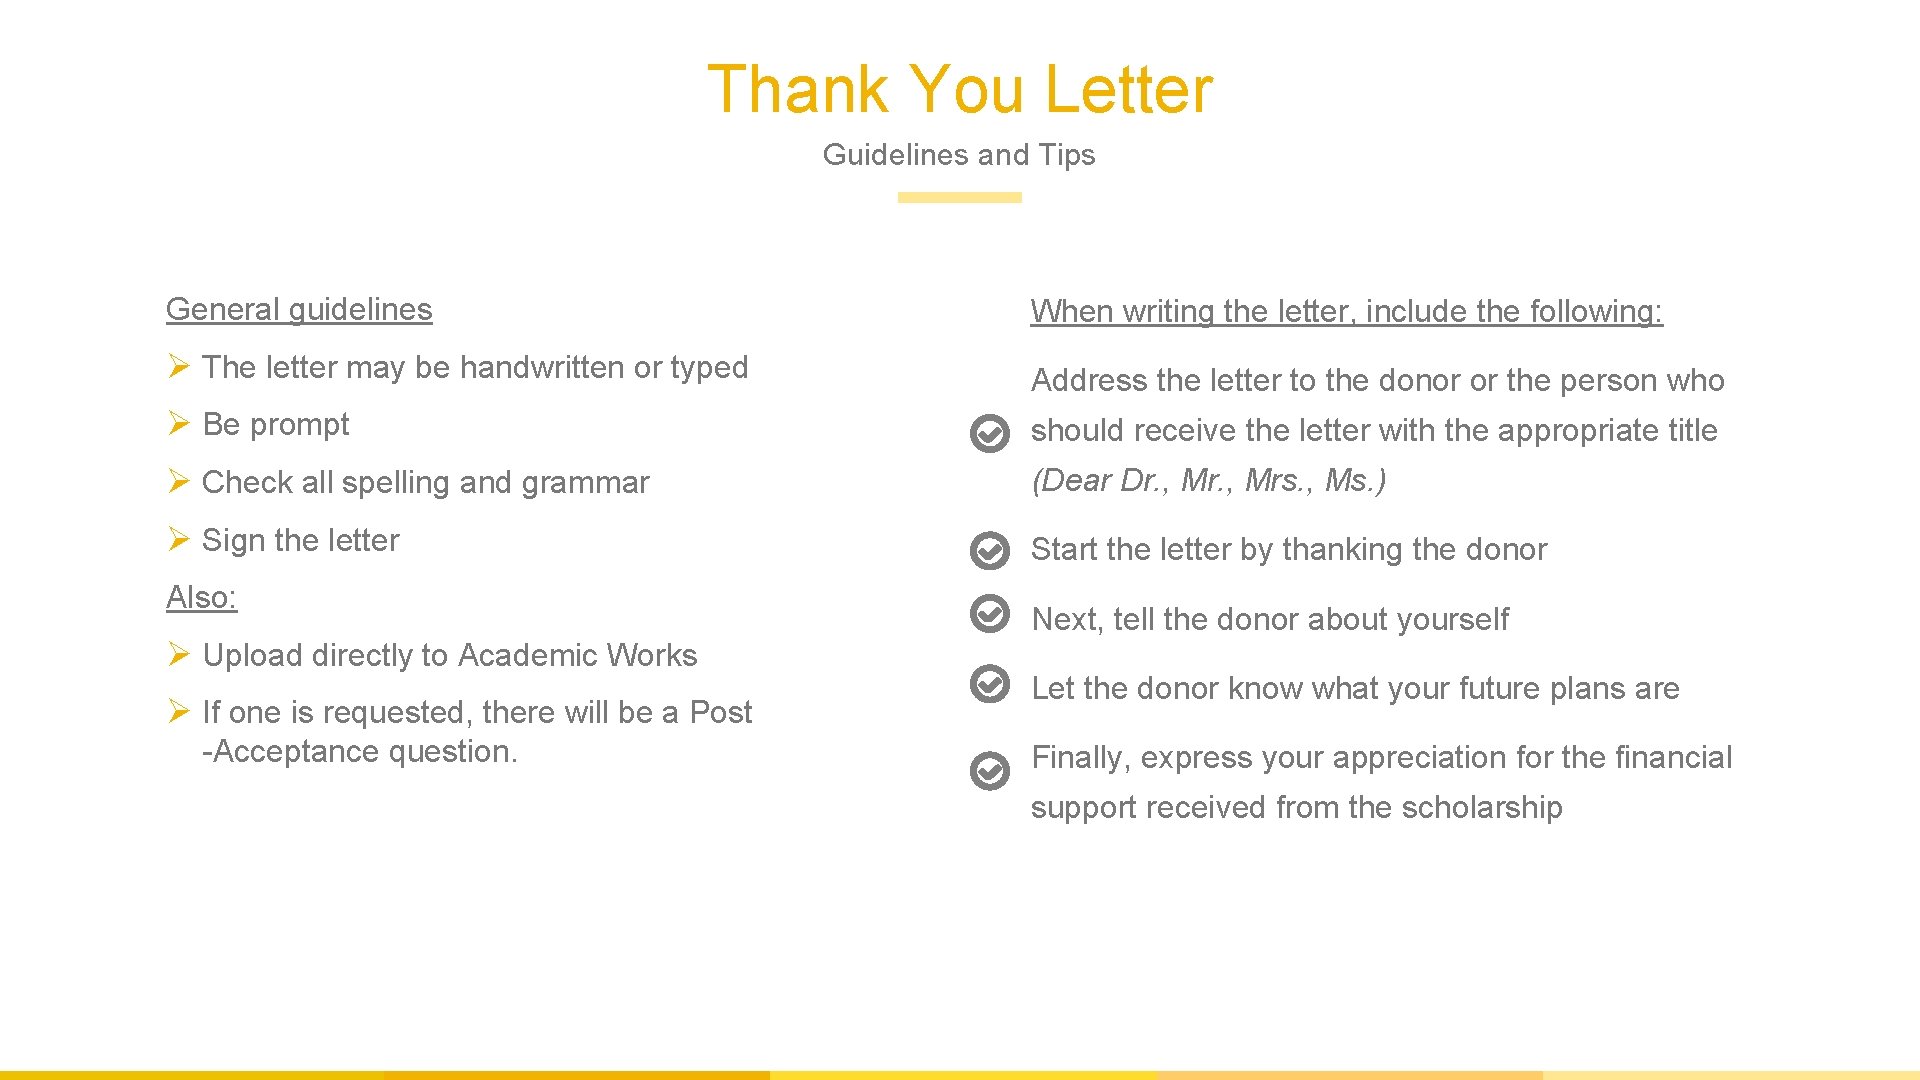 Thank You Letter Guidelines and Tips General guidelines When writing the letter, include the